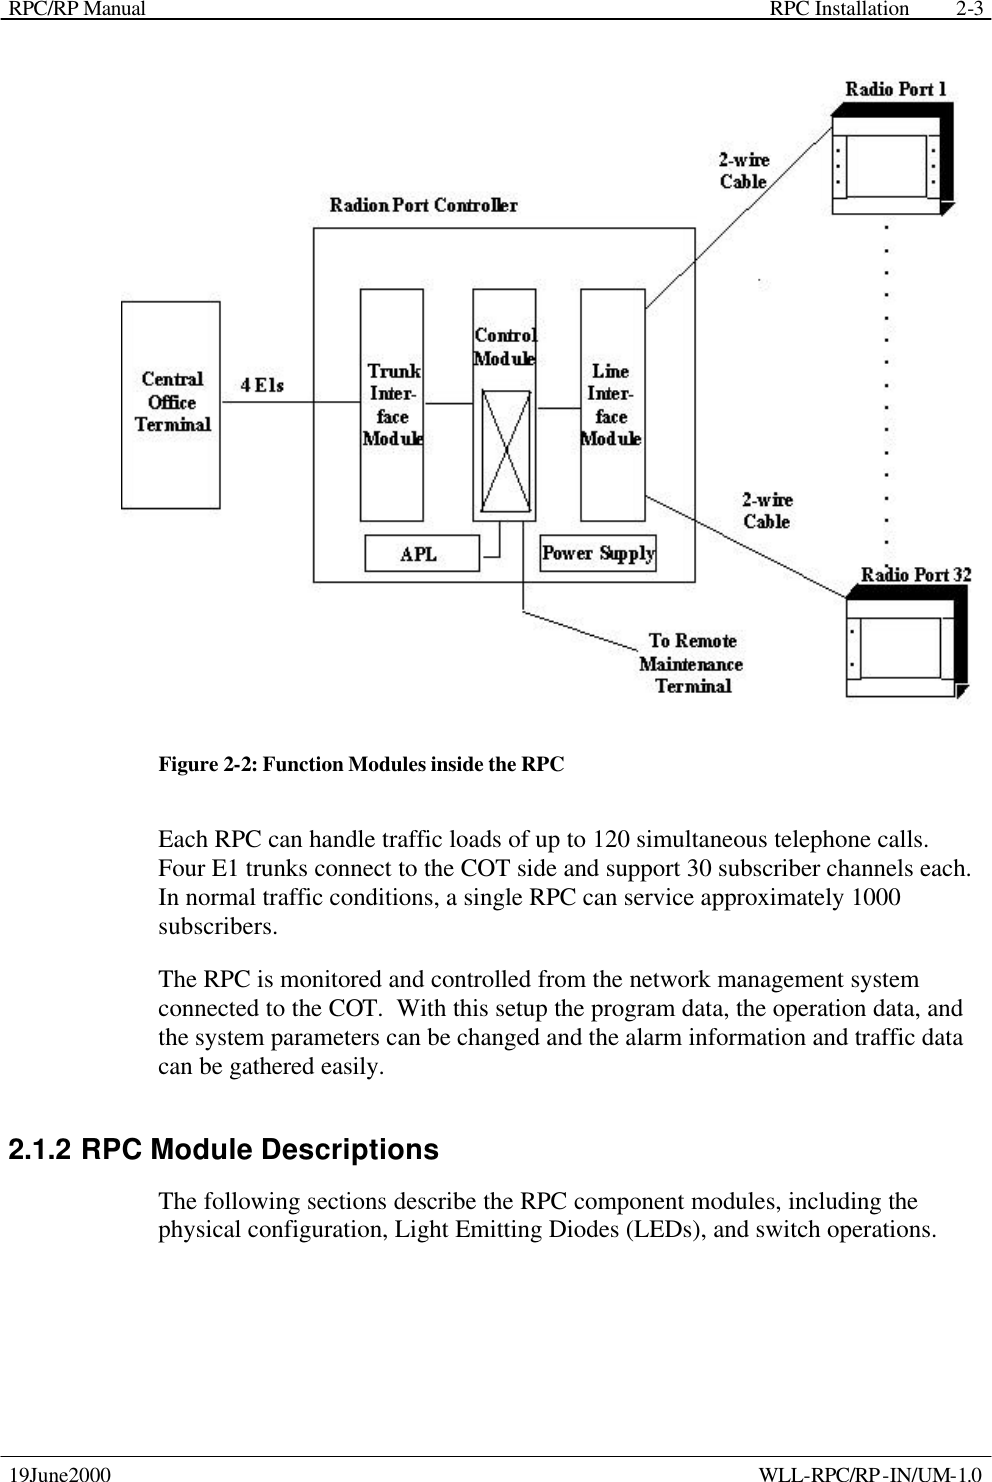 RPC/RP Manual    RPC Installation  19June2000    WLL-RPC/RP-IN/UM-1.0 2-3 Figure 2-2: Function Modules inside the RPC Each RPC can handle traffic loads of up to 120 simultaneous telephone calls.  Four E1 trunks connect to the COT side and support 30 subscriber channels each.  In normal traffic conditions, a single RPC can service approximately 1000 subscribers. The RPC is monitored and controlled from the network management system connected to the COT.  With this setup the program data, the operation data, and the system parameters can be changed and the alarm information and traffic data can be gathered easily. 2.1.2 RPC Module Descriptions The following sections describe the RPC component modules, including the physical configuration, Light Emitting Diodes (LEDs), and switch operations. 